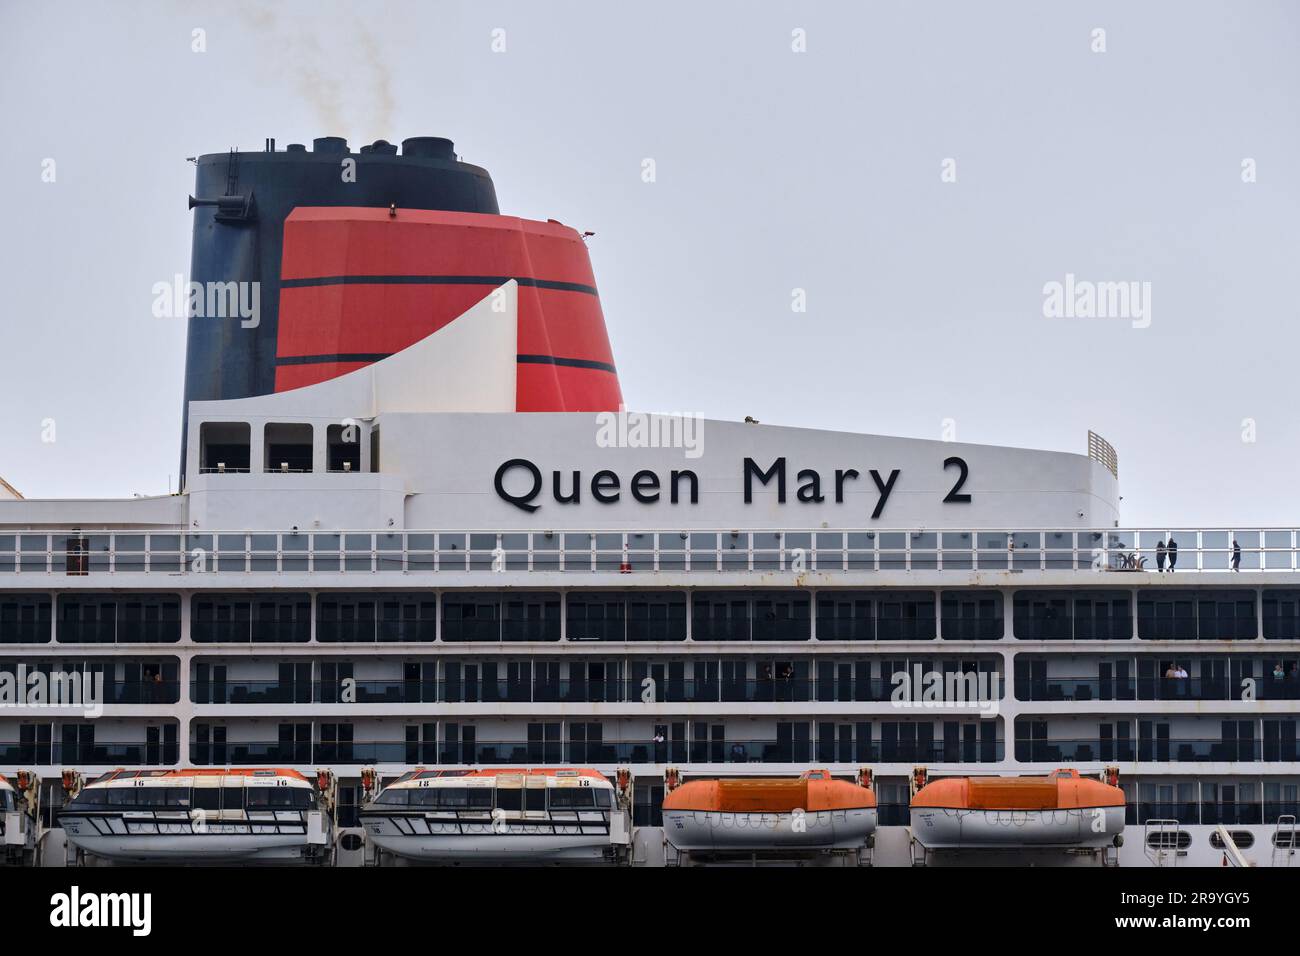 The Ocean Line Queen Mary 2 name of the side of the ship Stock Photo